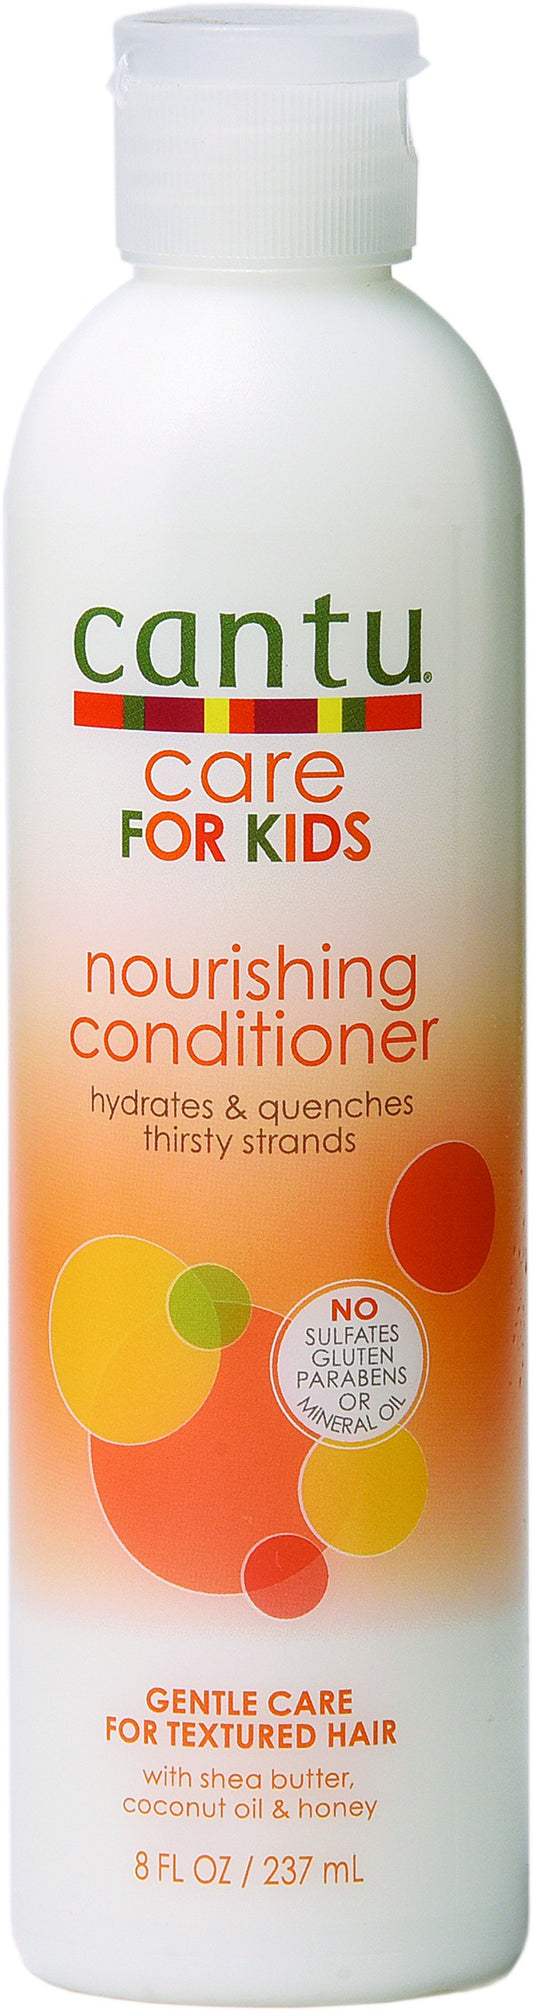 (COSMETICS HAIR CARE) Cantu Care For Kids Nourishing Conditioner 8 oz.